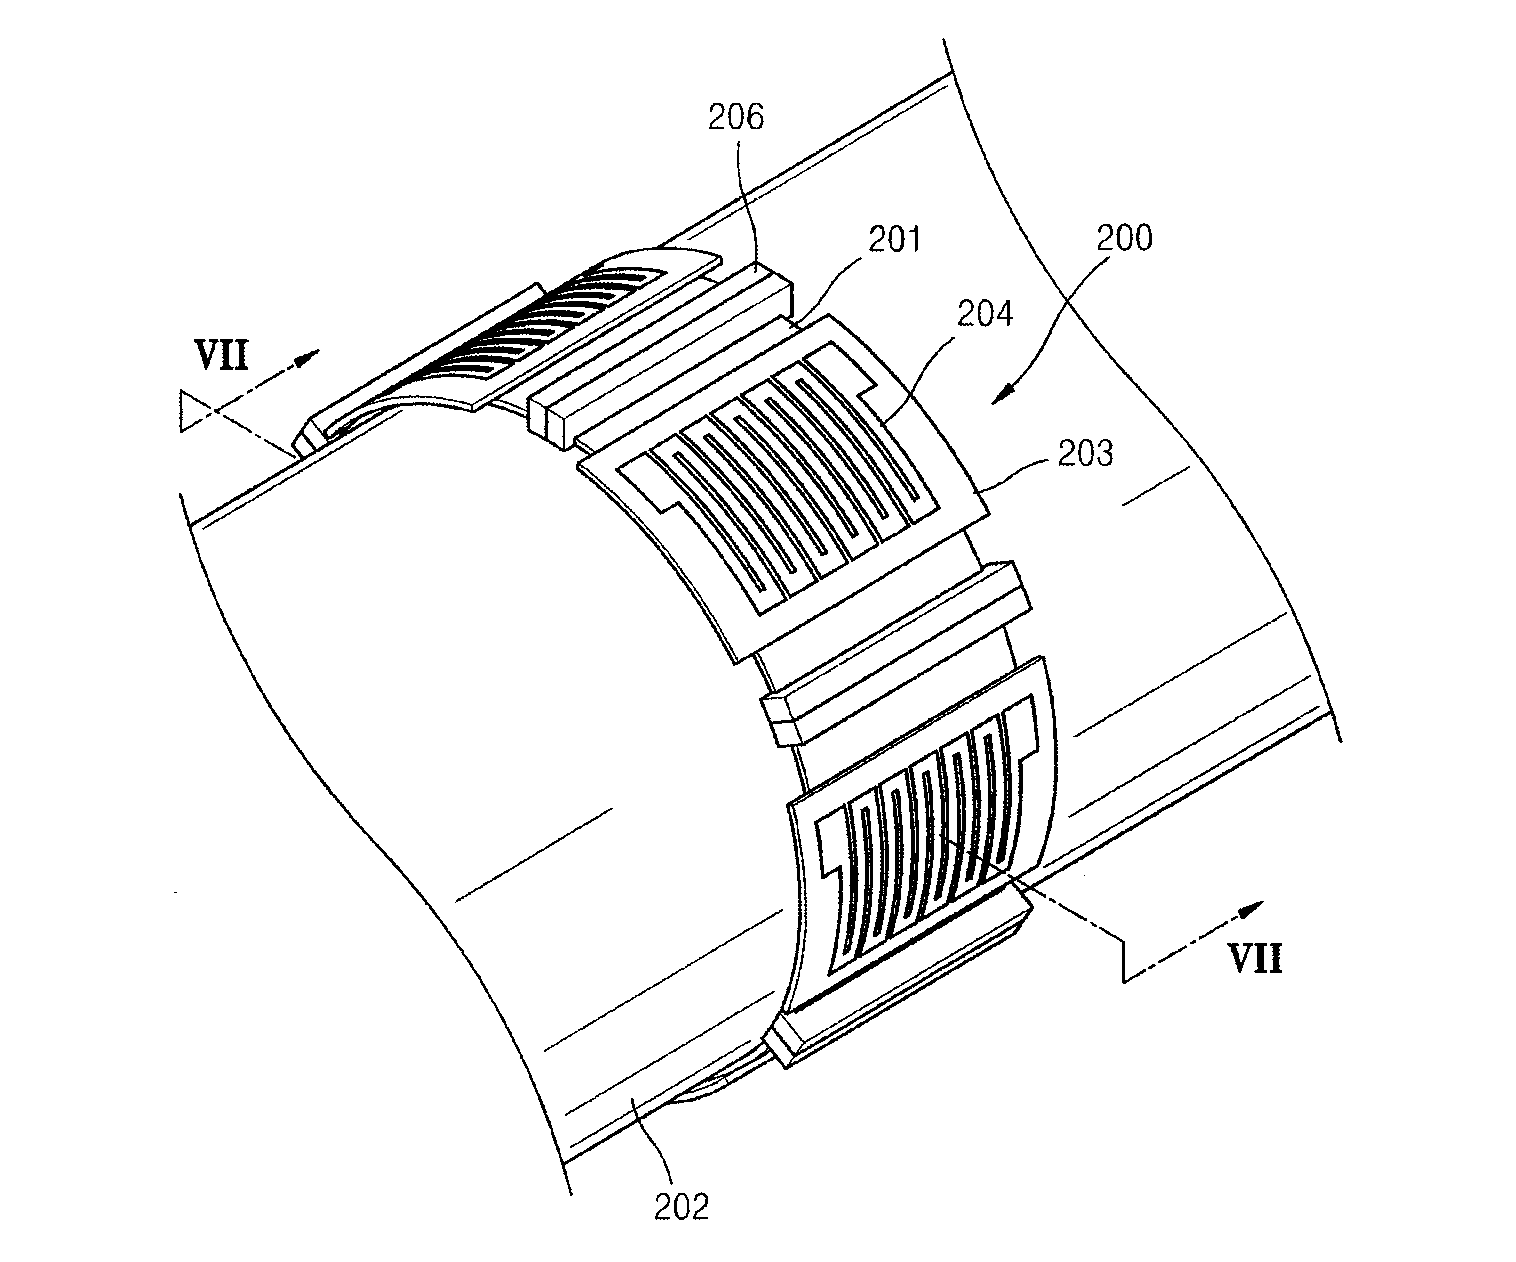 Segmented magnetostrictive patch array transducer, apparatus for diagnosing structural fault by using the same, and method of operating the same